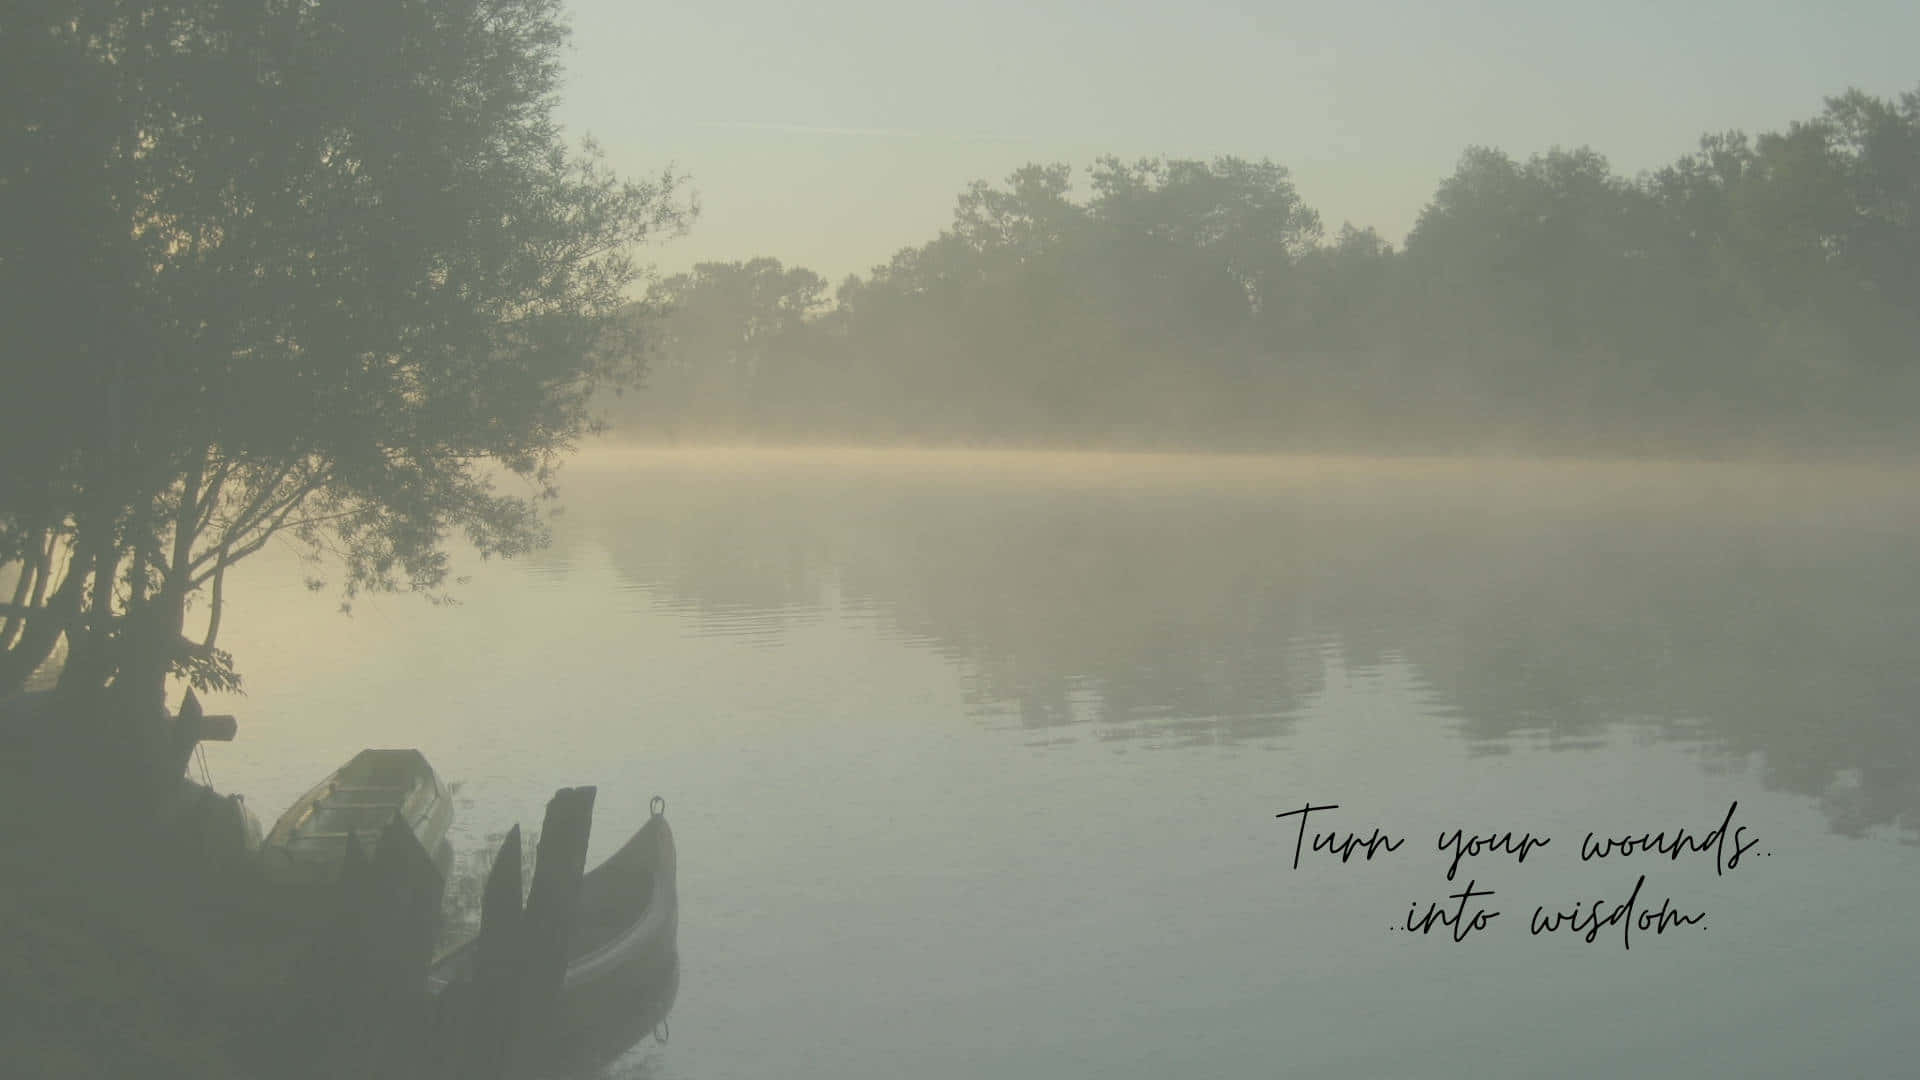 Misty Lake Morning_ Inspirational Quote Wallpaper